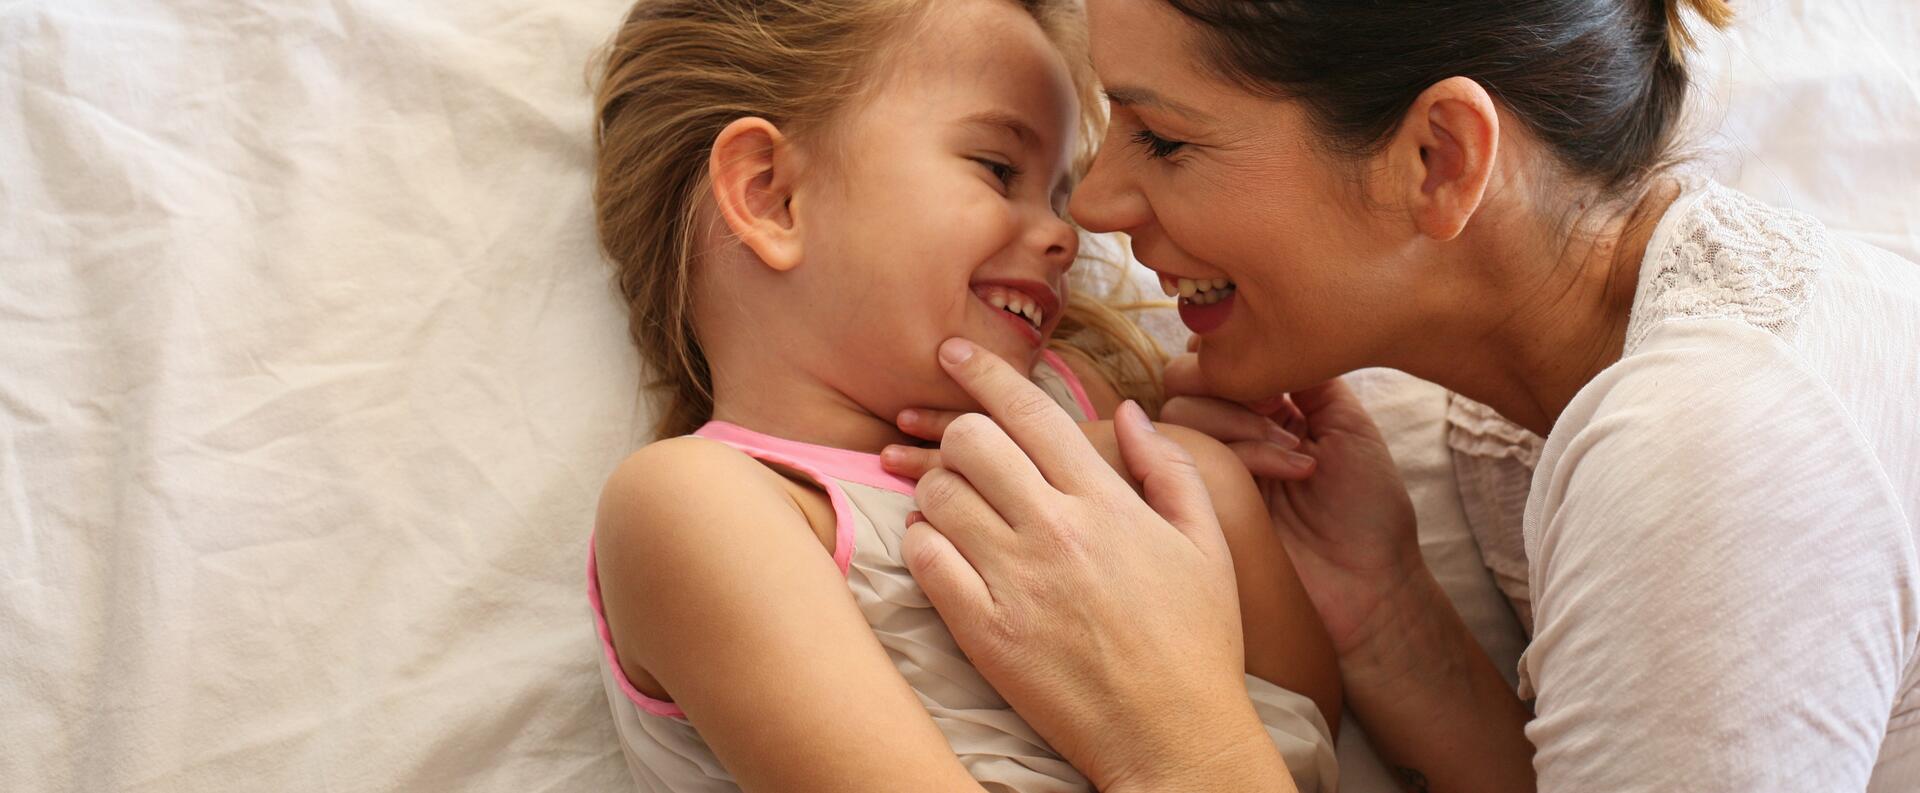 AD_LIFE-MOMENTS_MOTHER-AND-DAUGTHER-LAUGHING_LARGE_2021